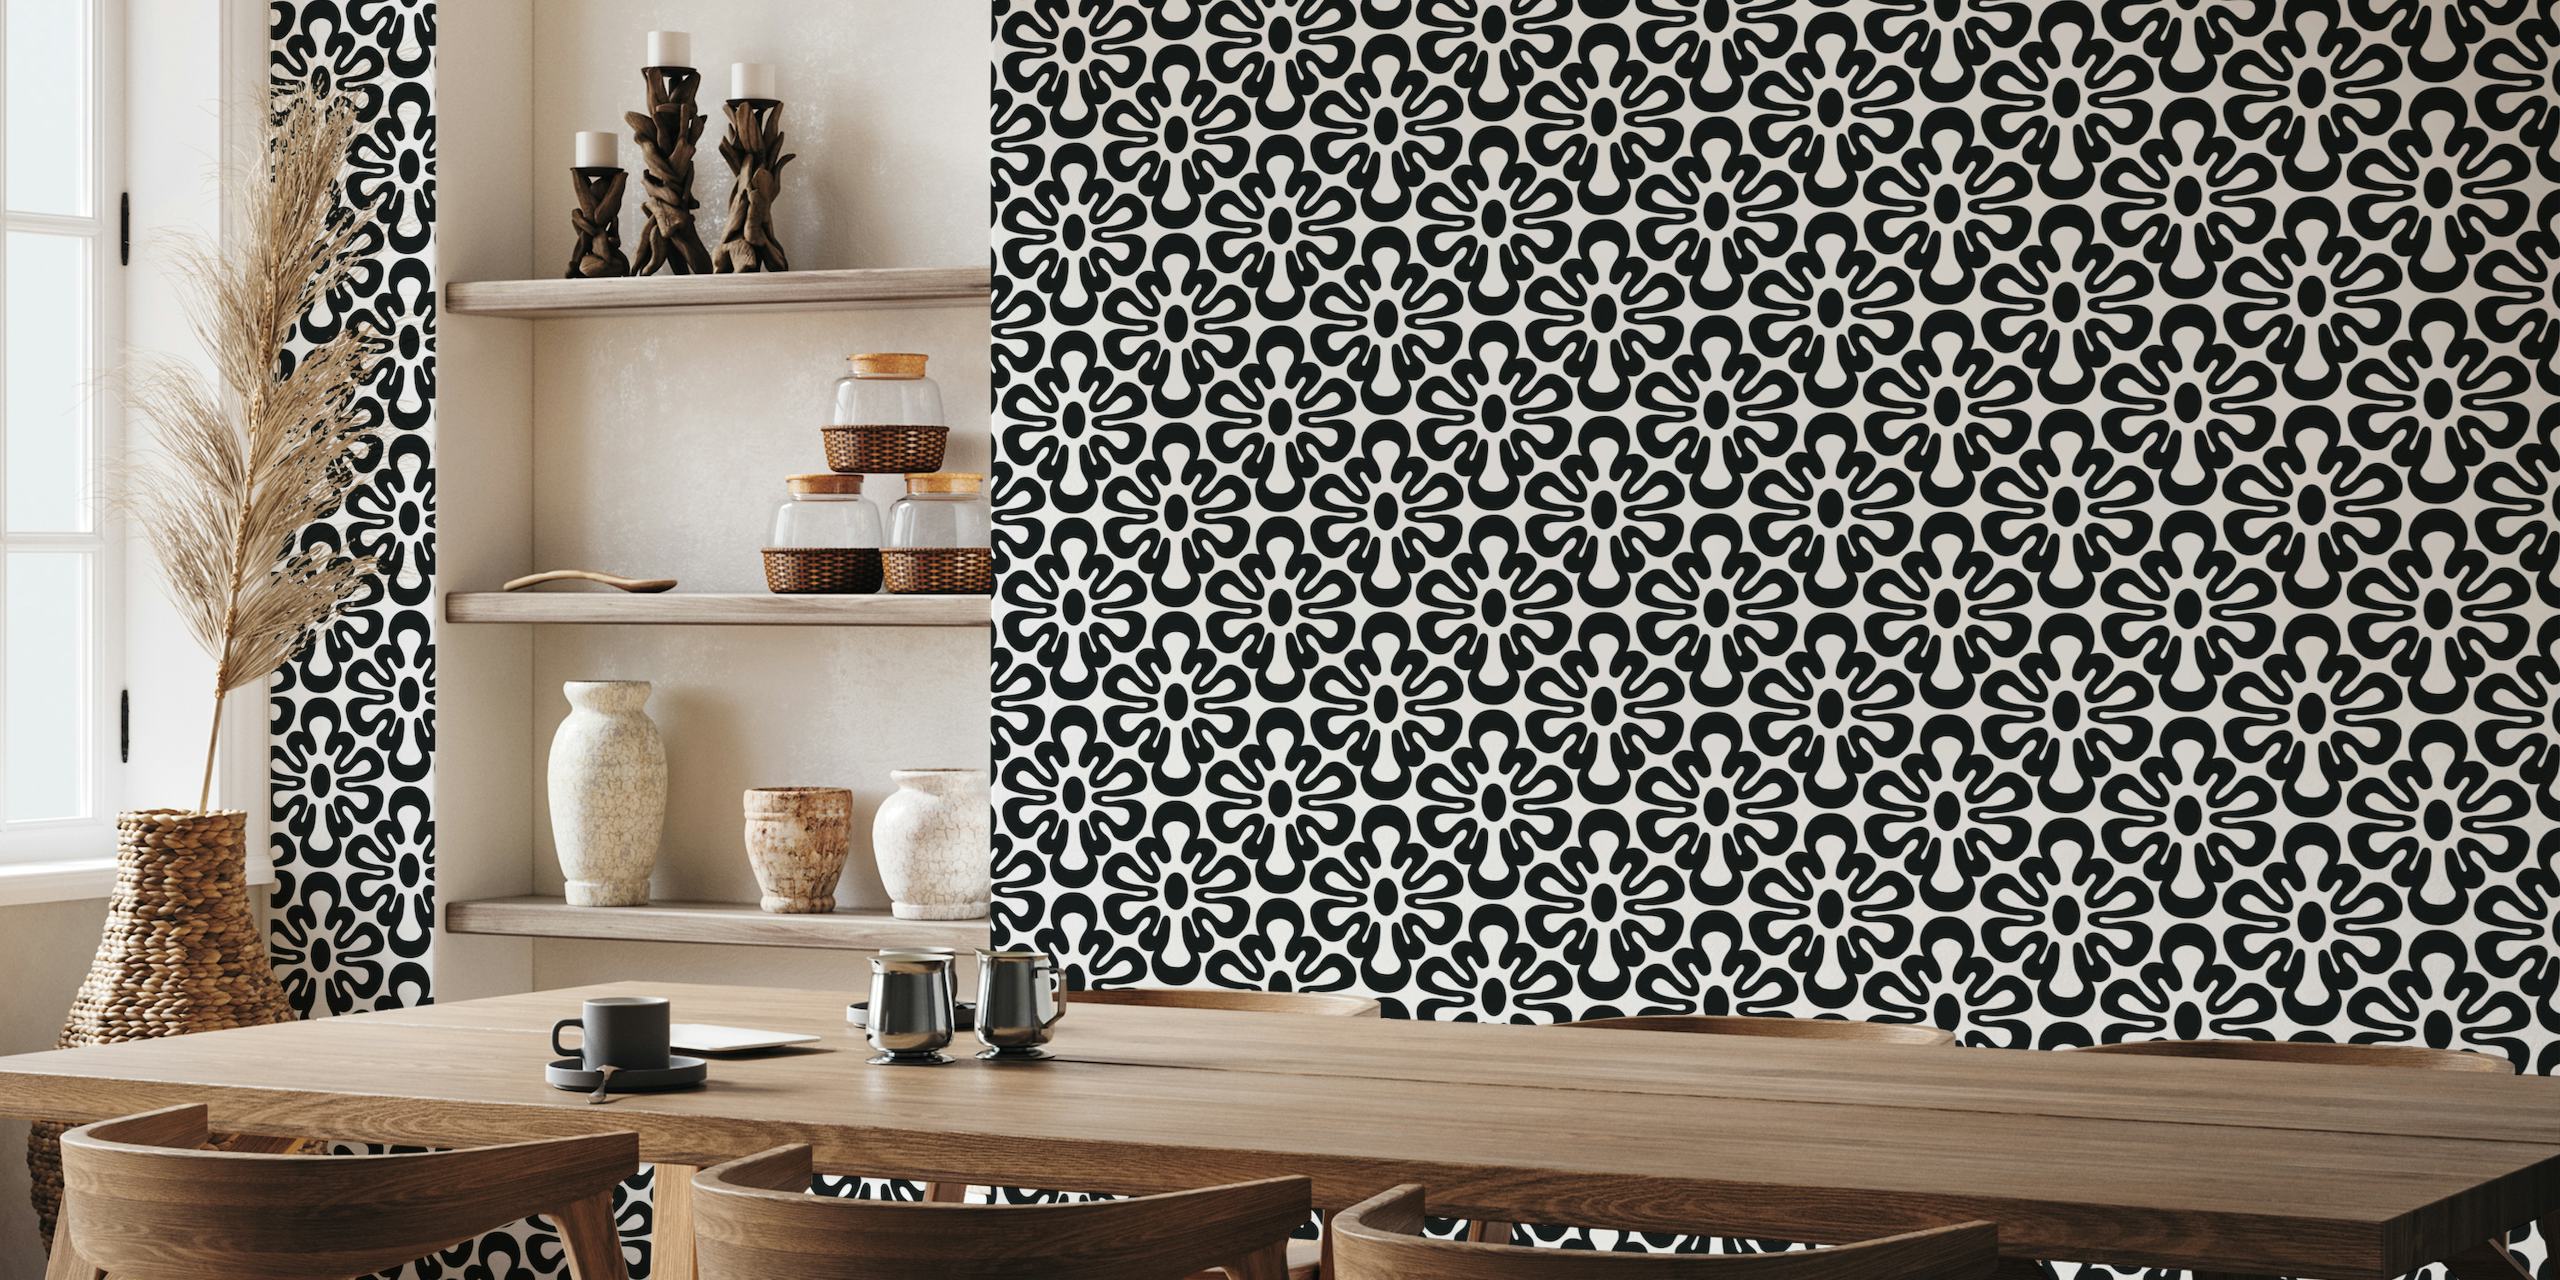 2625 D - abstract shapes pattern, black and white tapet